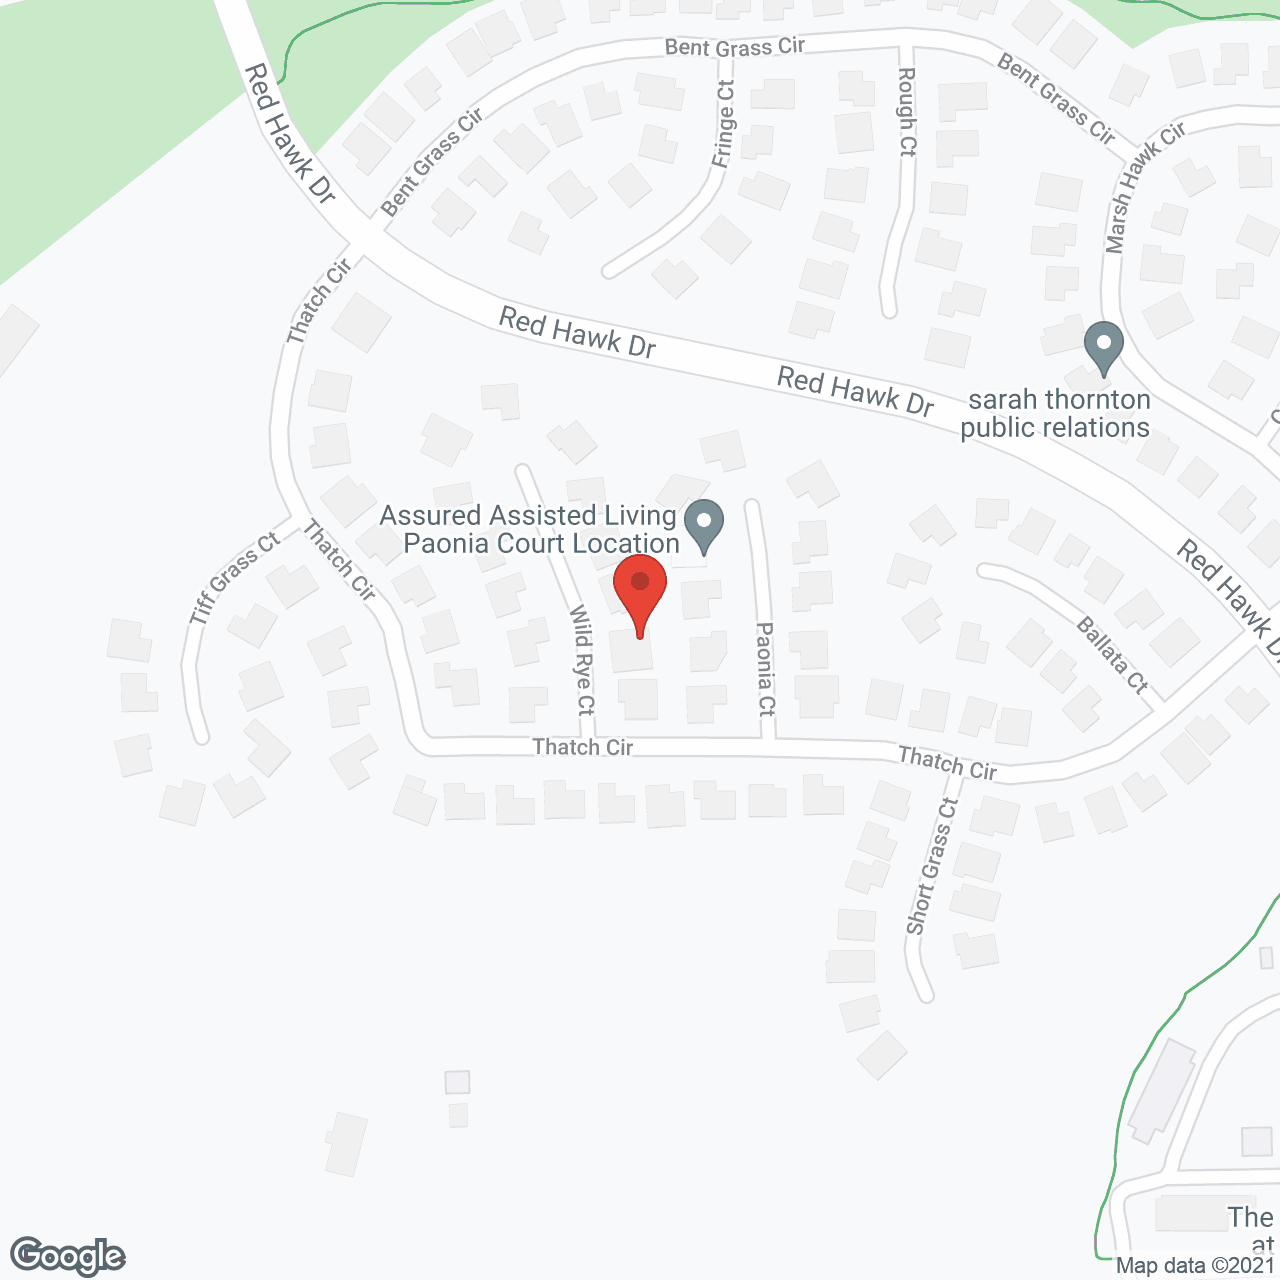 Castle Rock Assisted Living in google map